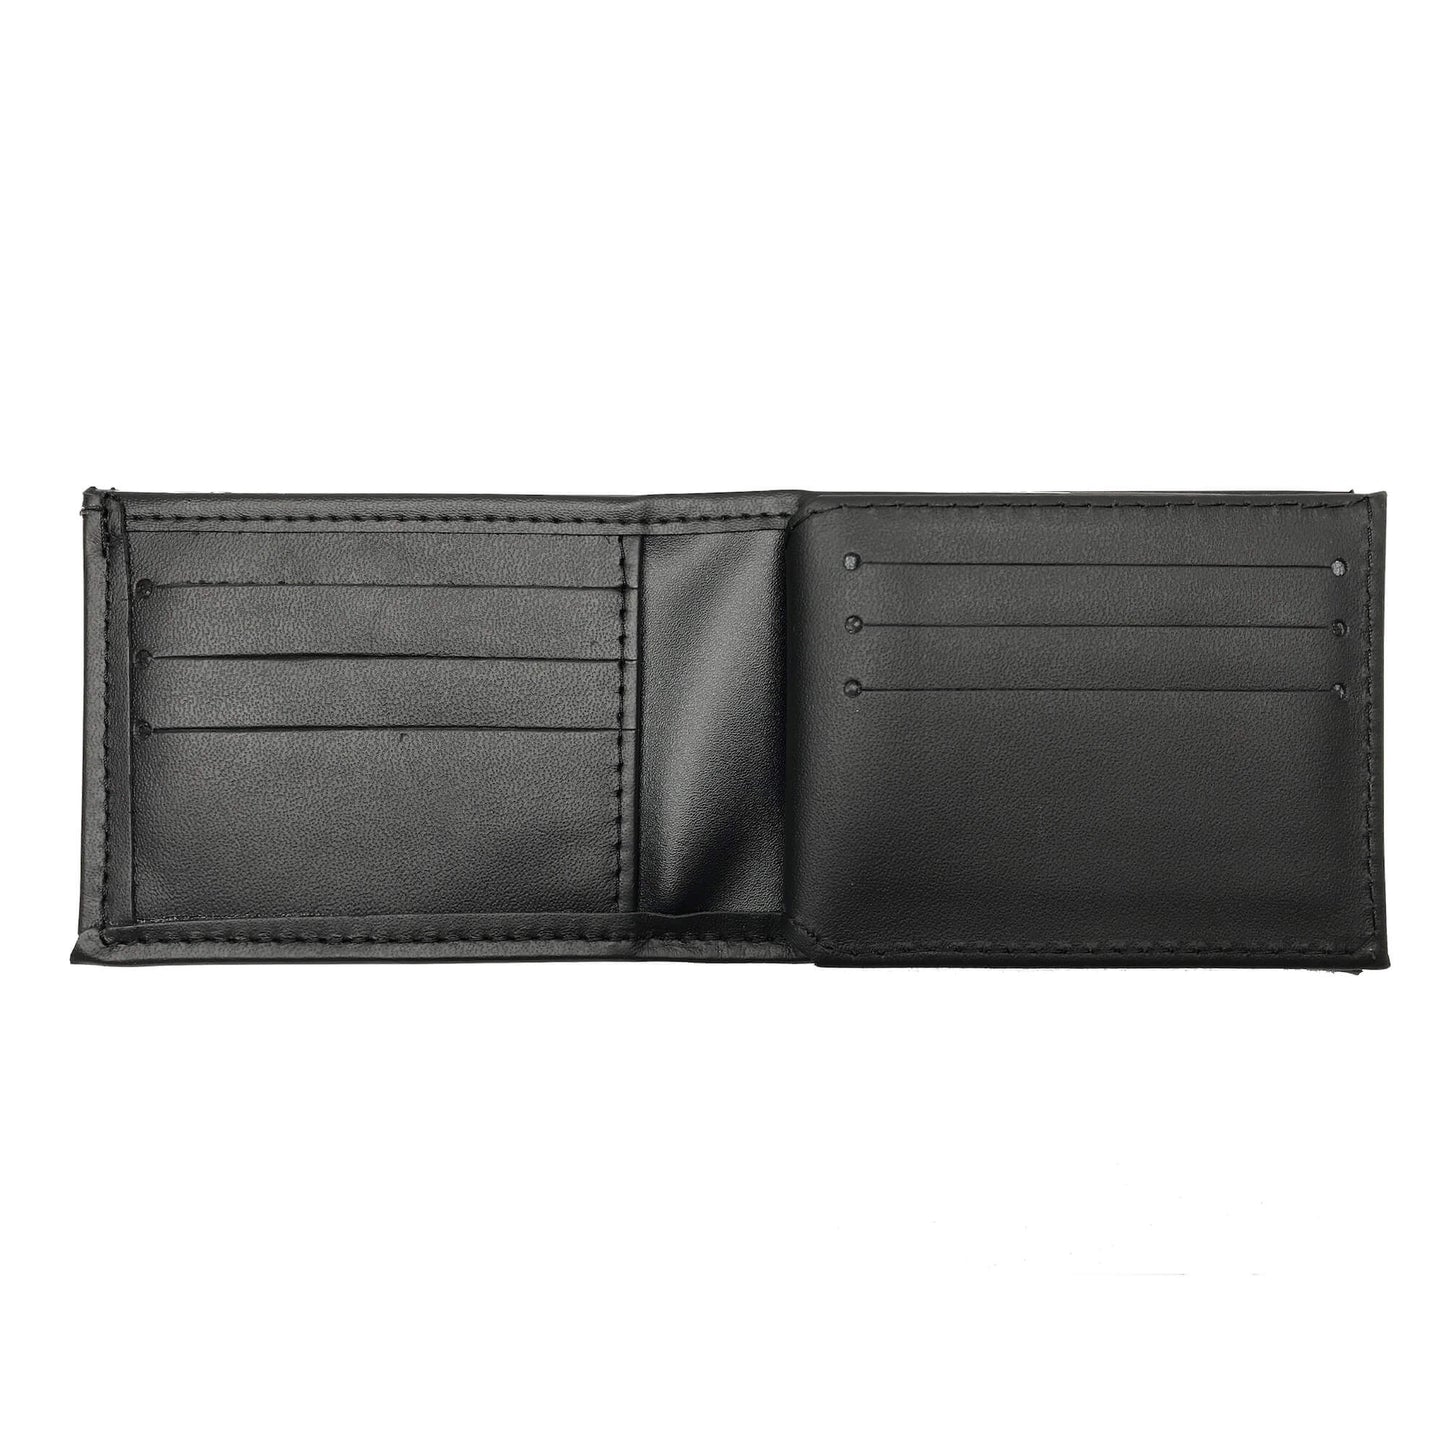 New York Police Department (NYPD) Captain Horizontal Bifold Hidden Badge Wallet-Perfect Fit-911 Duty Gear USA